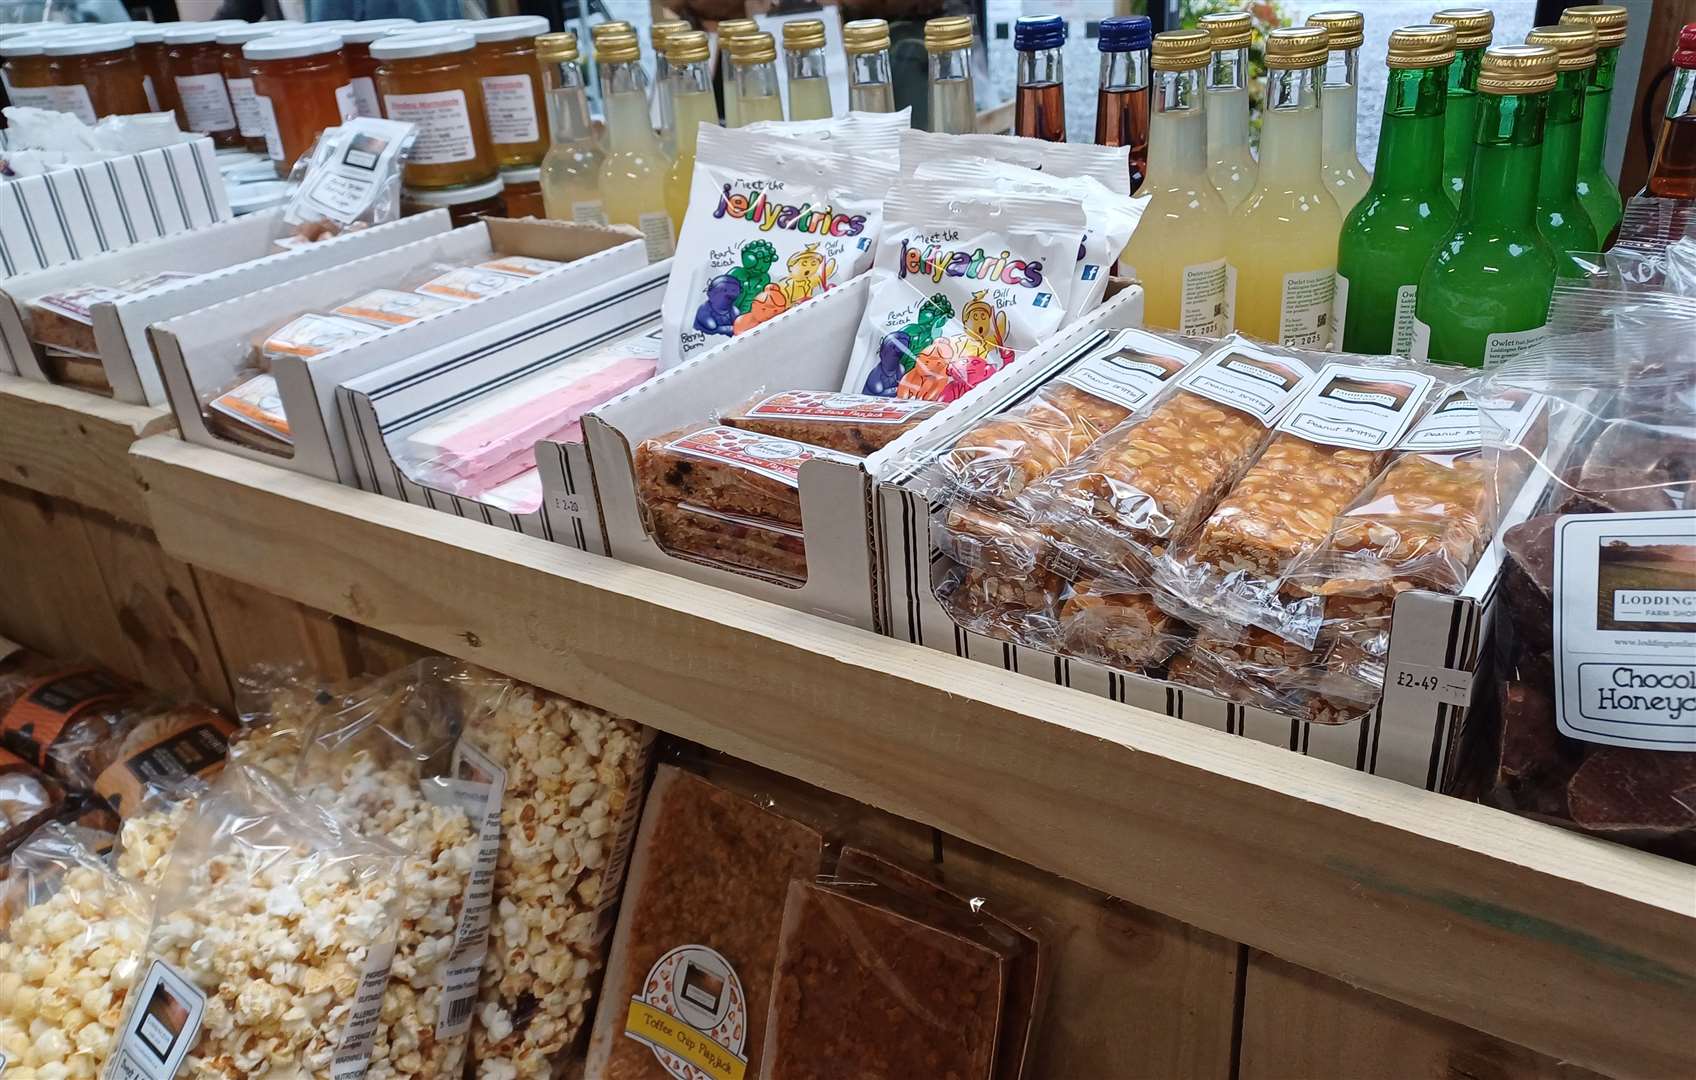 Sweets and treats for sale in the store. Picture: Ben Austin